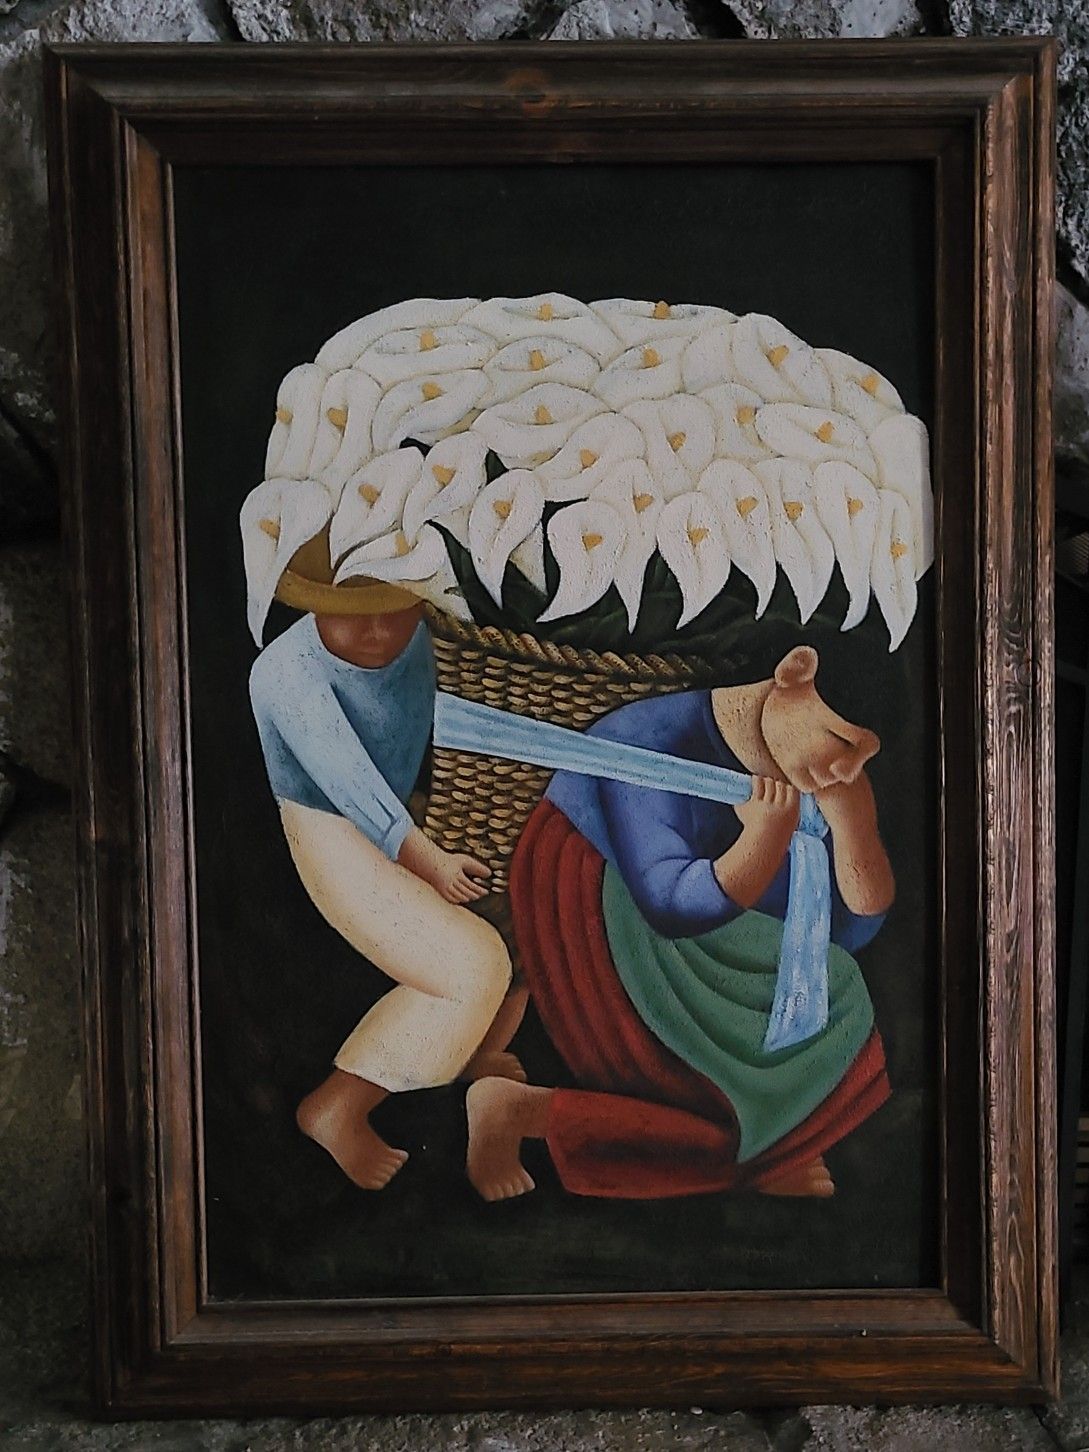 Diego Rivera "Flower carrier" framed painting